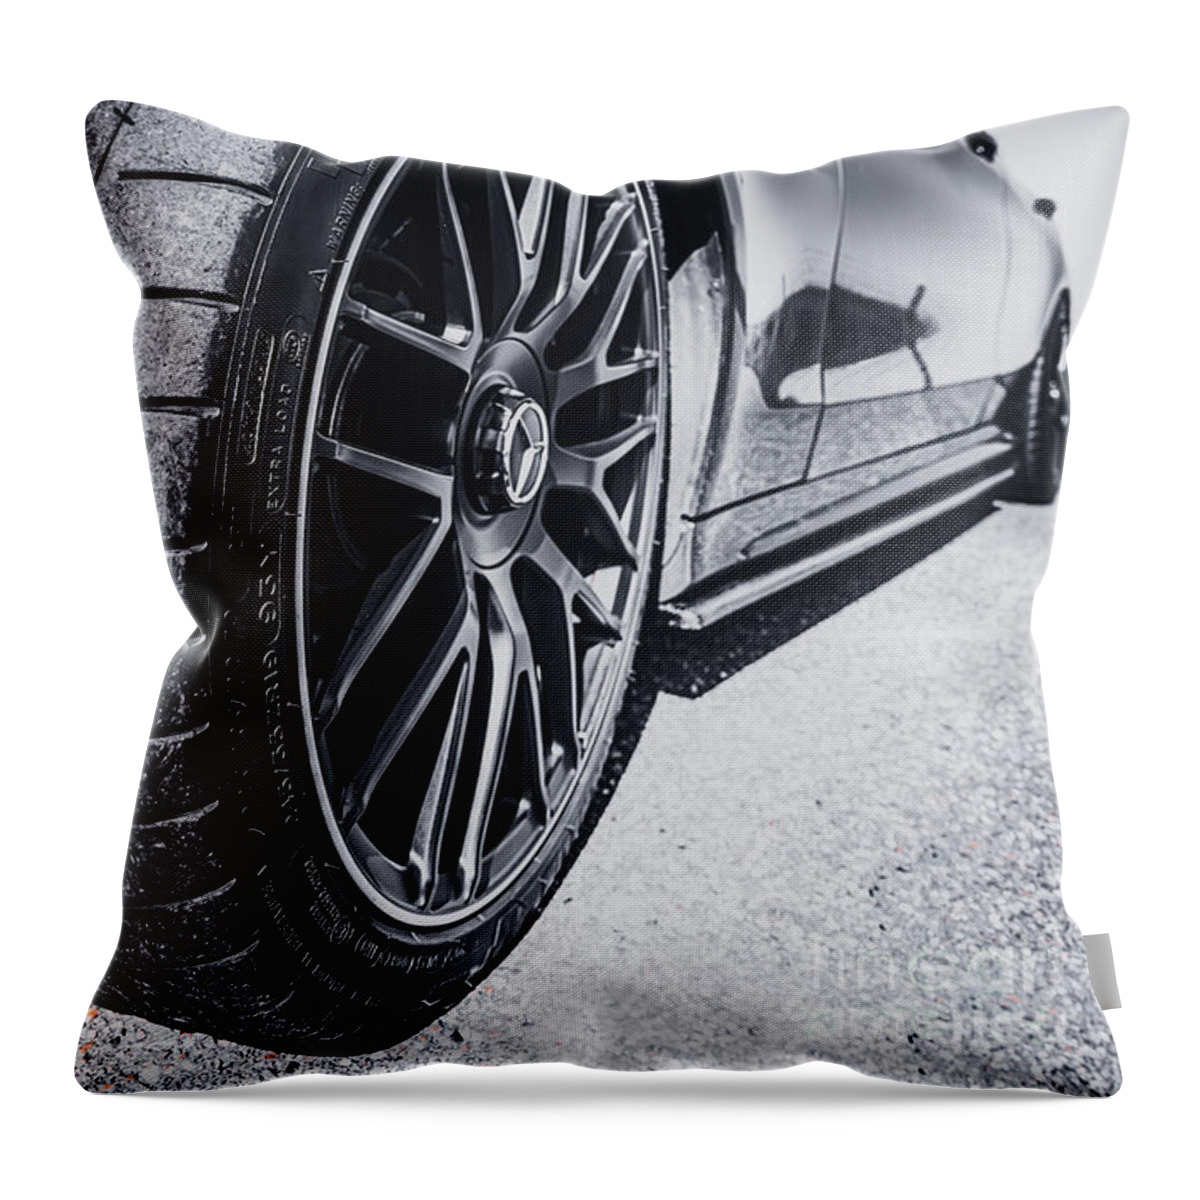 Black&white Throw Pillow featuring the photograph Mercedes AMG Car by MPhotographer